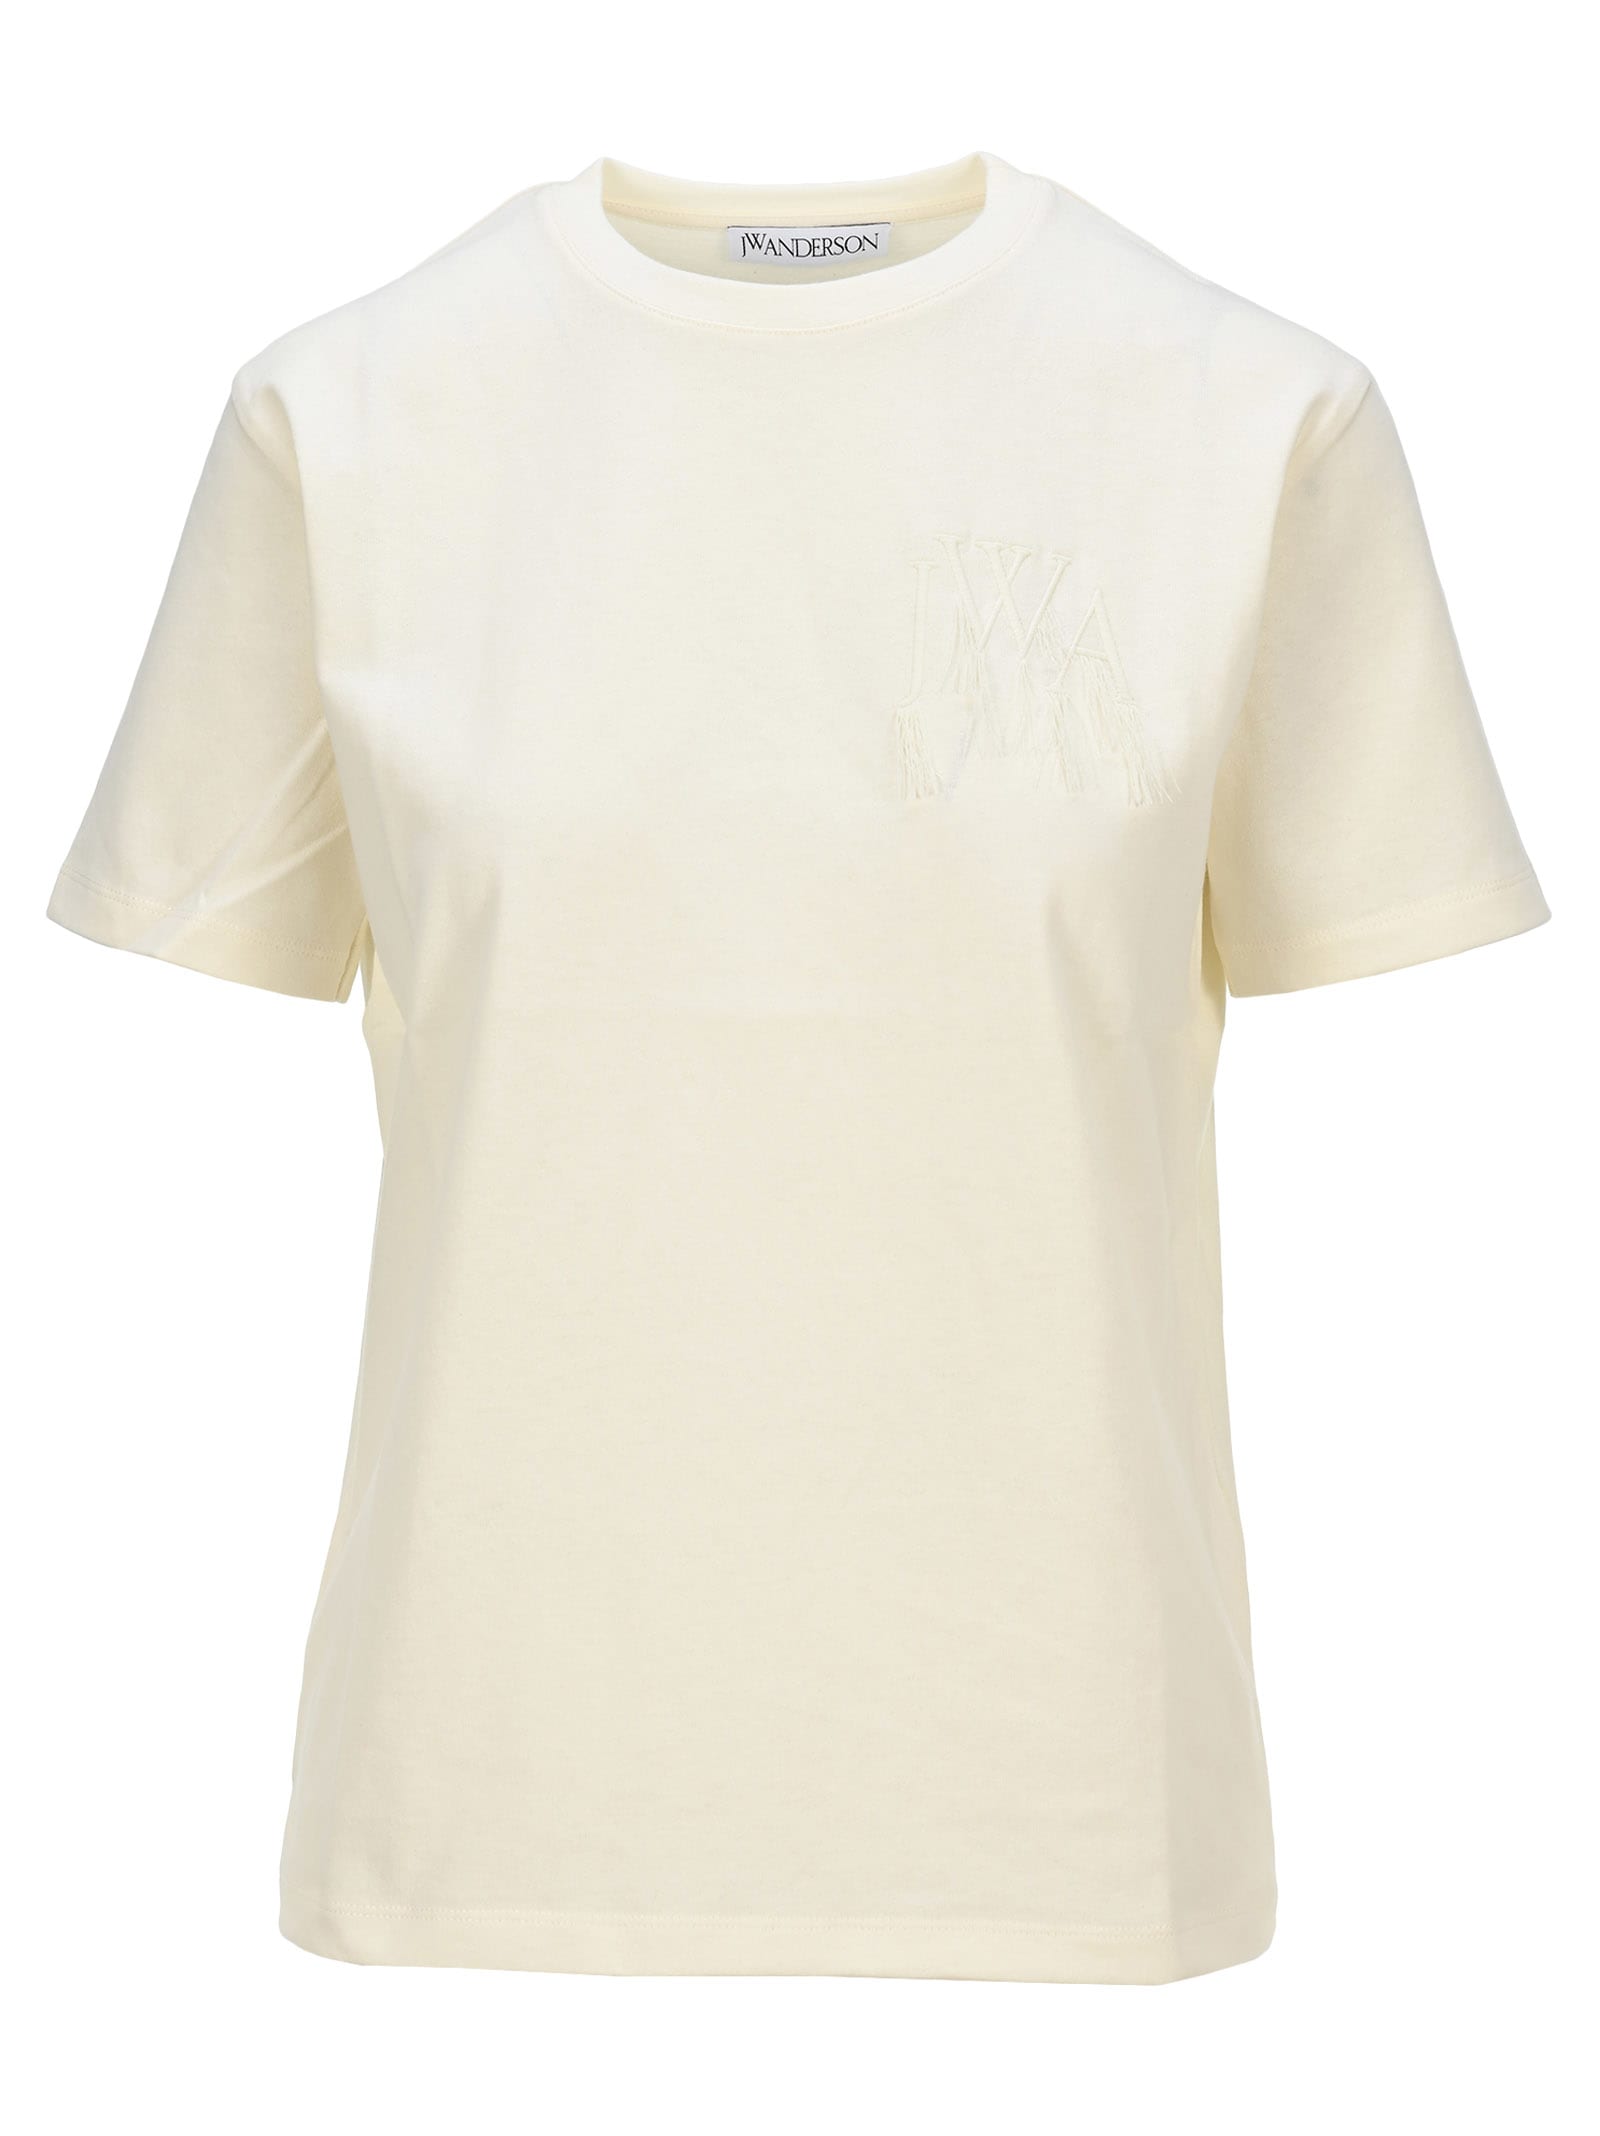 JW ANDERSON JW ANDERSON JWA EMBROIDERED T-SHIRT,JE0047/PG0079 002 OFF WHITE